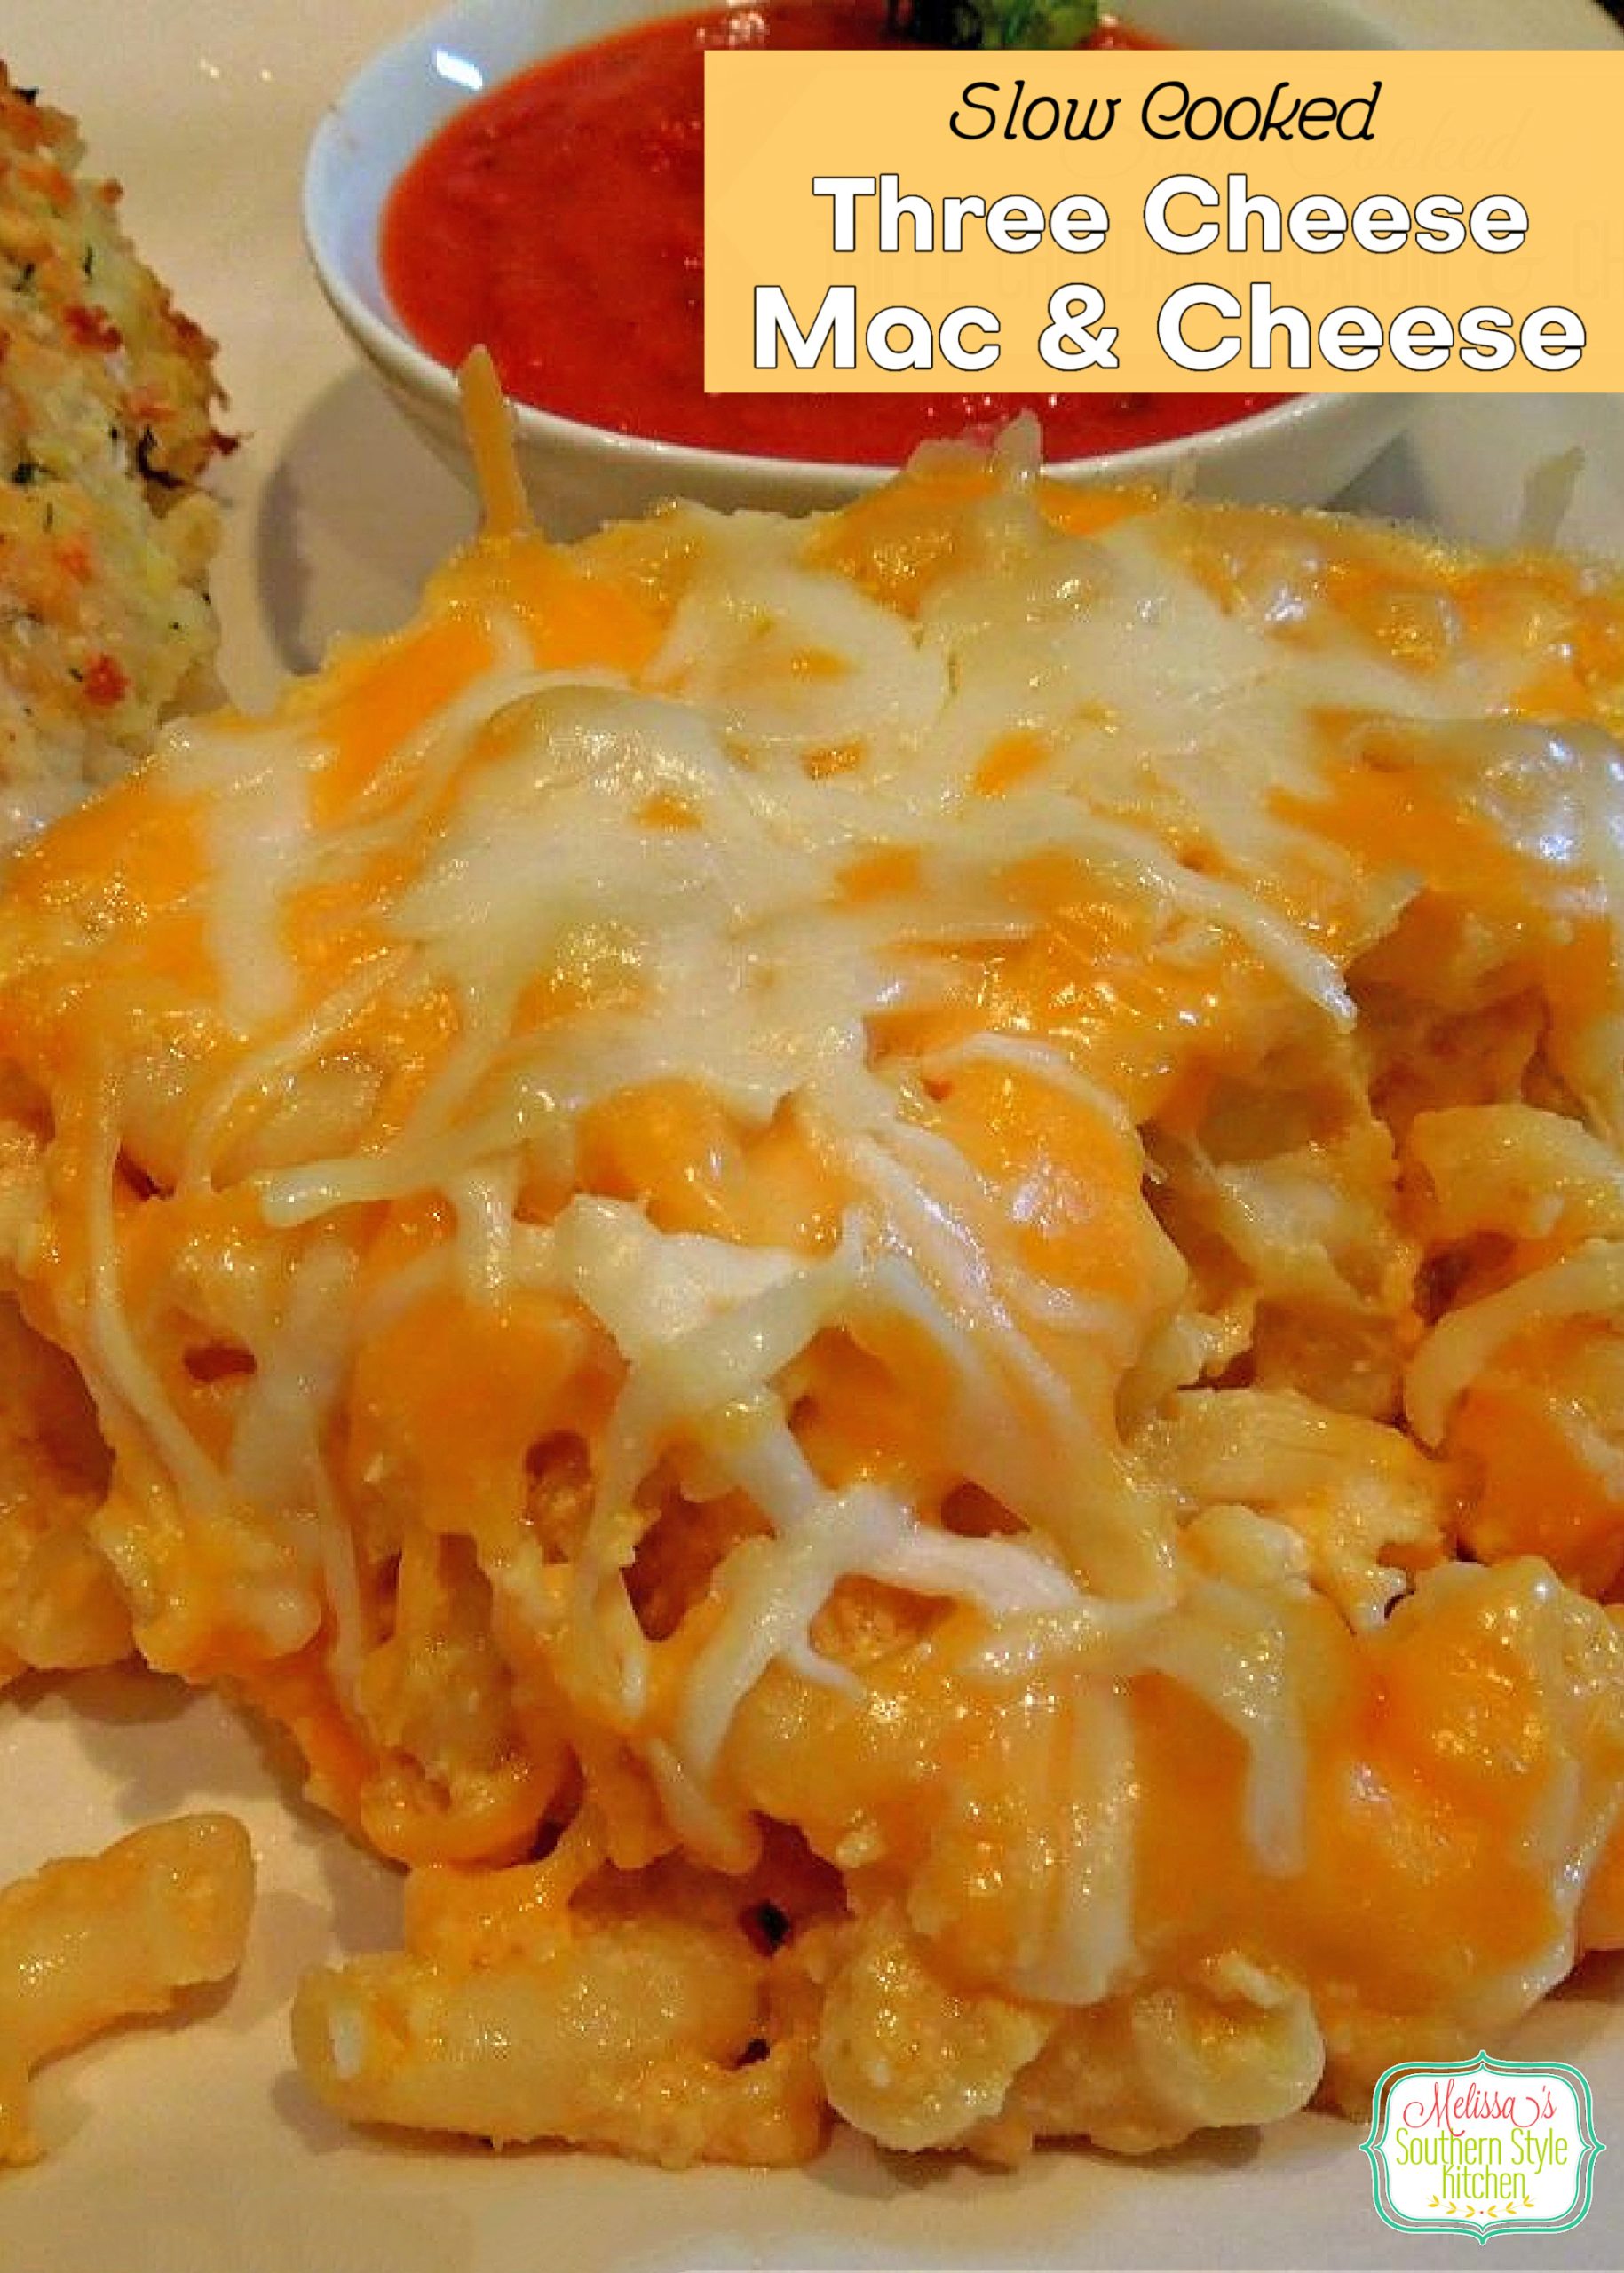 slow-cooked-three-cheese-mac-and-cheese-recipe